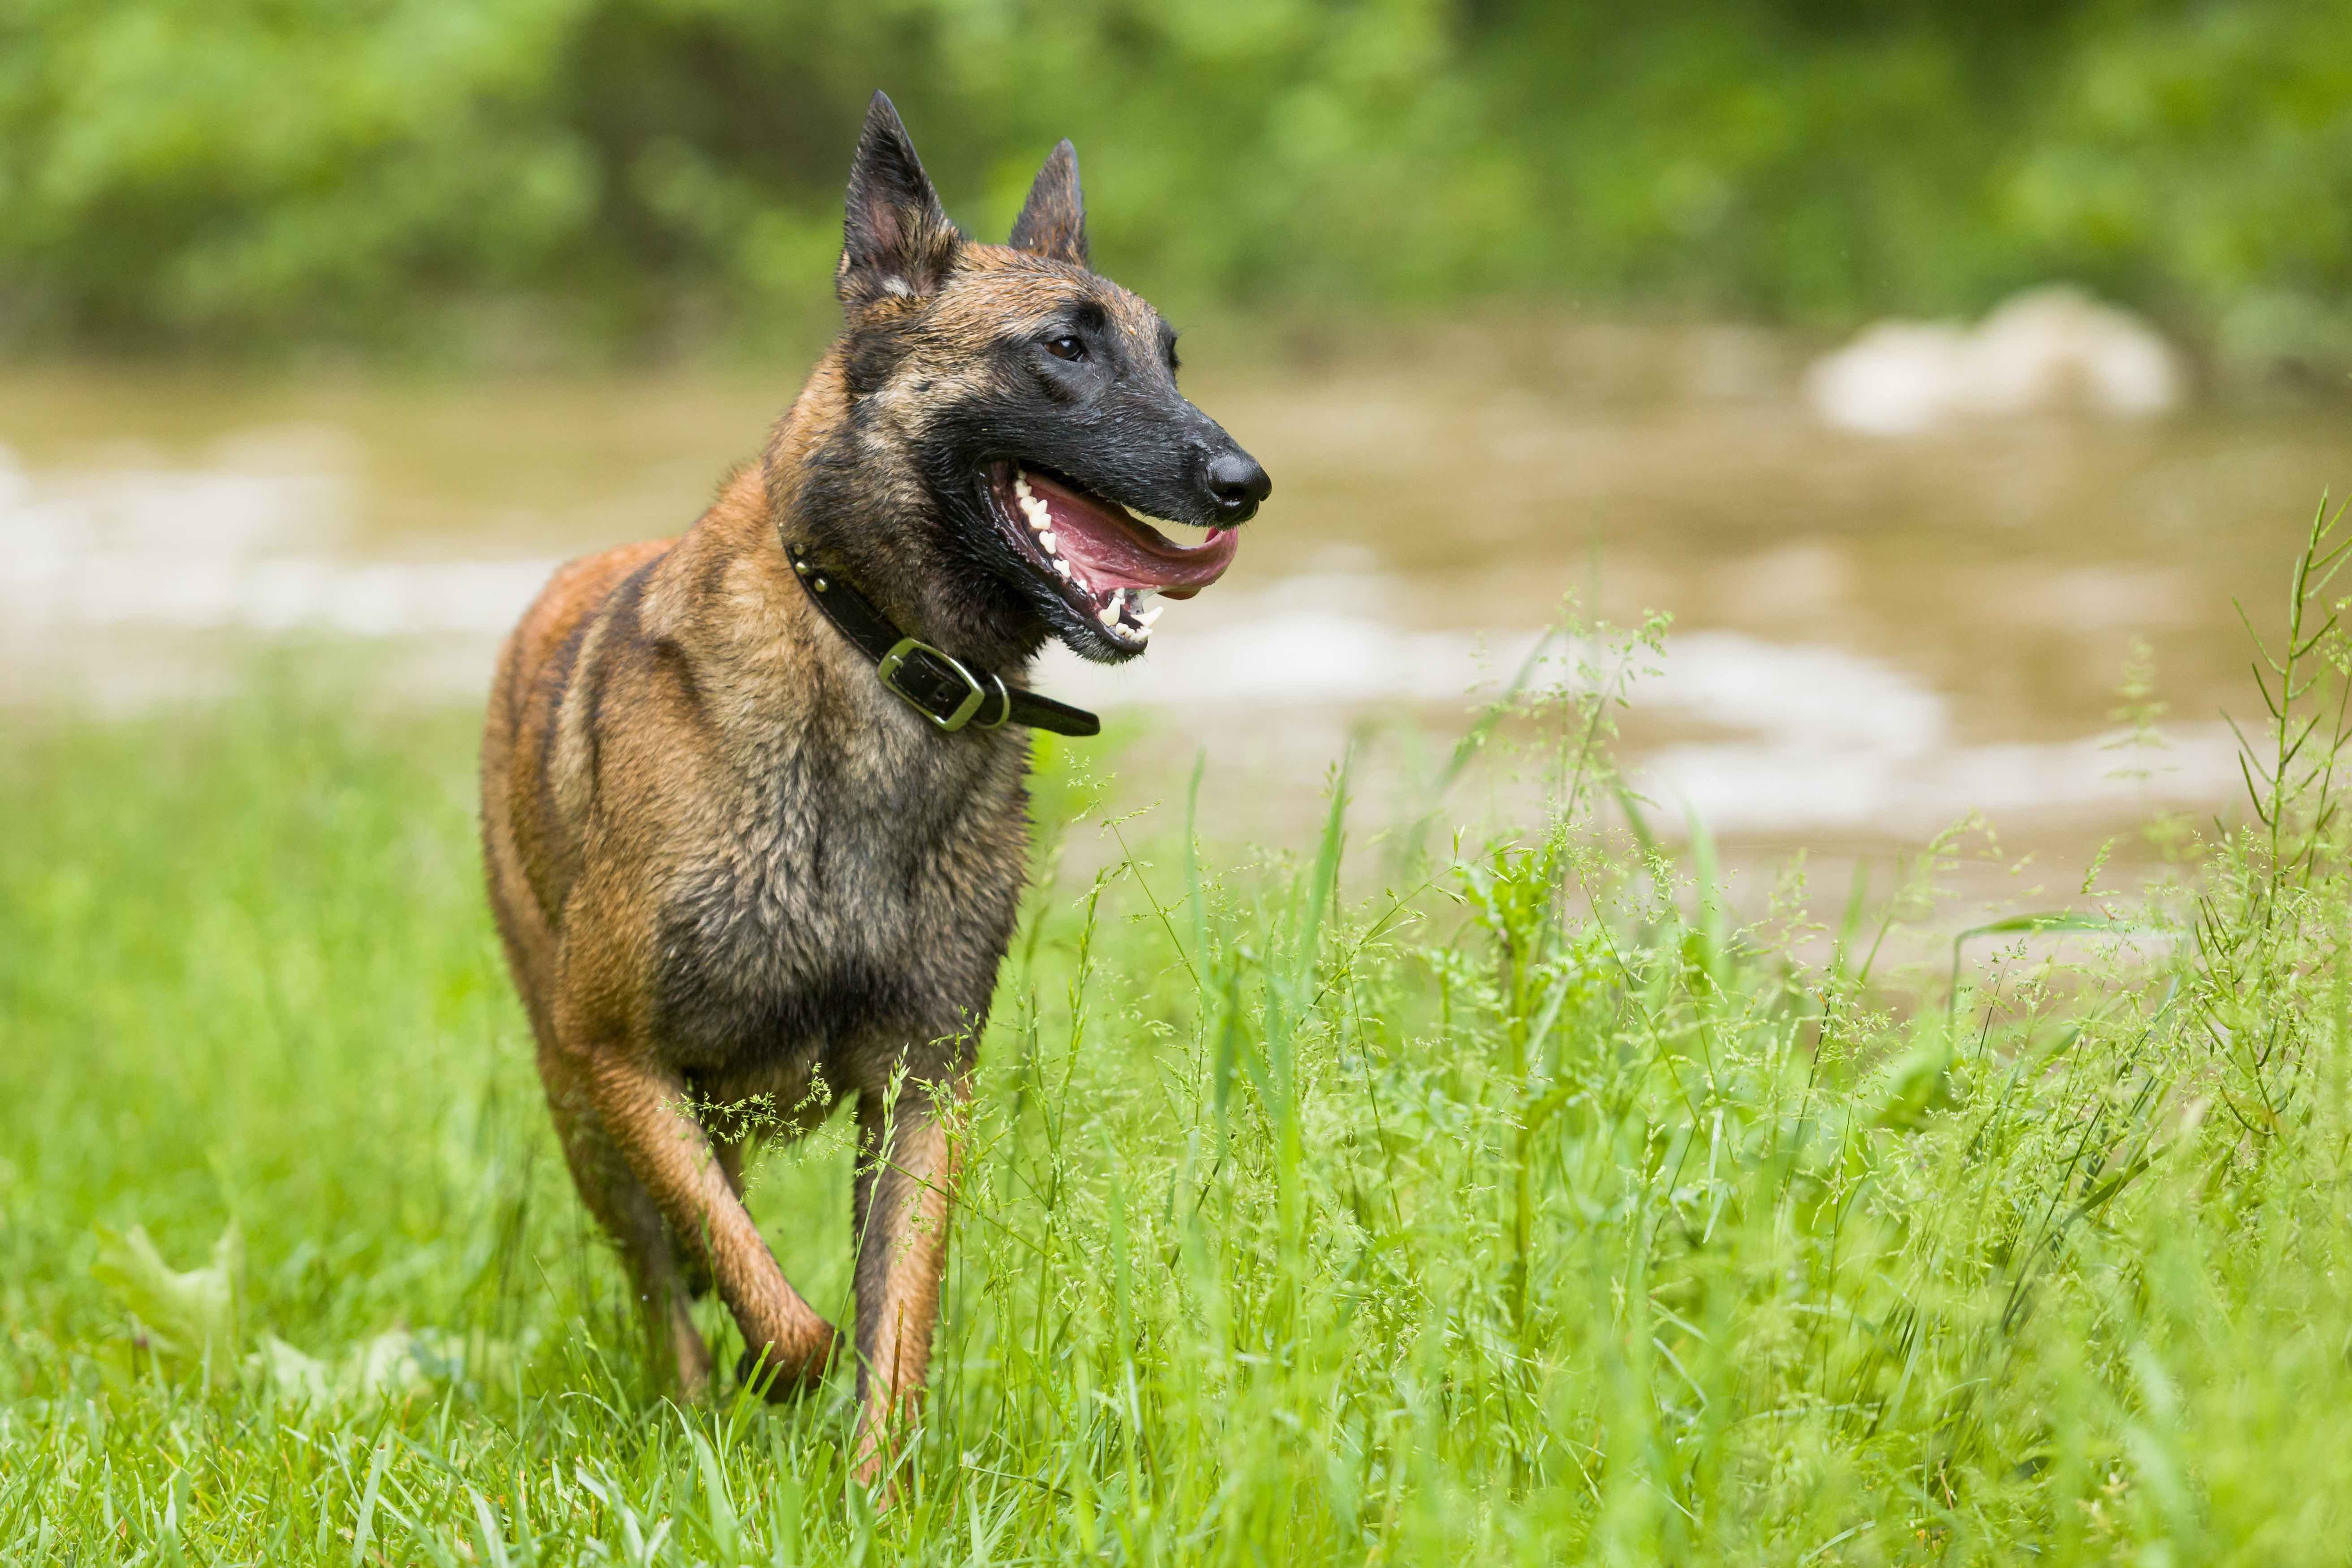 belgian malinois trotting through tall grass with his tongue hanging out